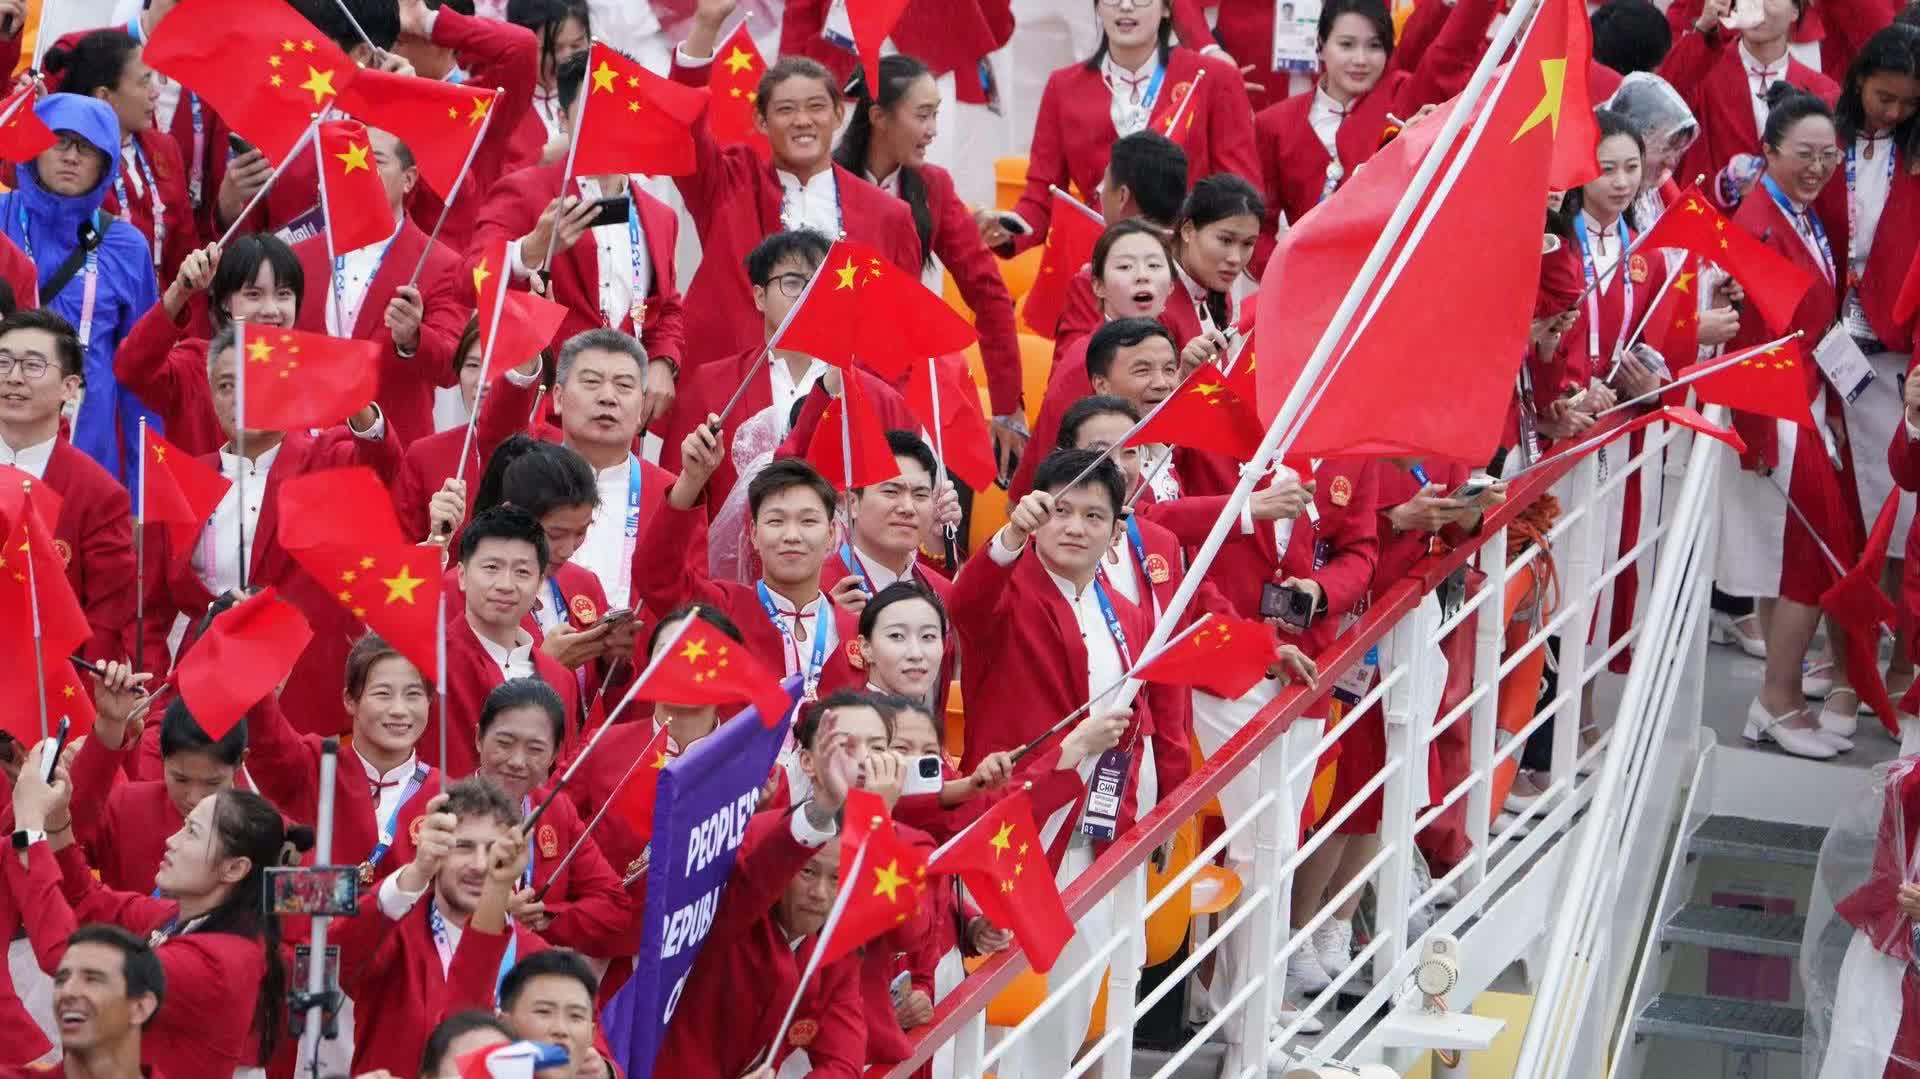 (Photos) Chinese delegation takes boat at opening ceremony of Paris Olympics